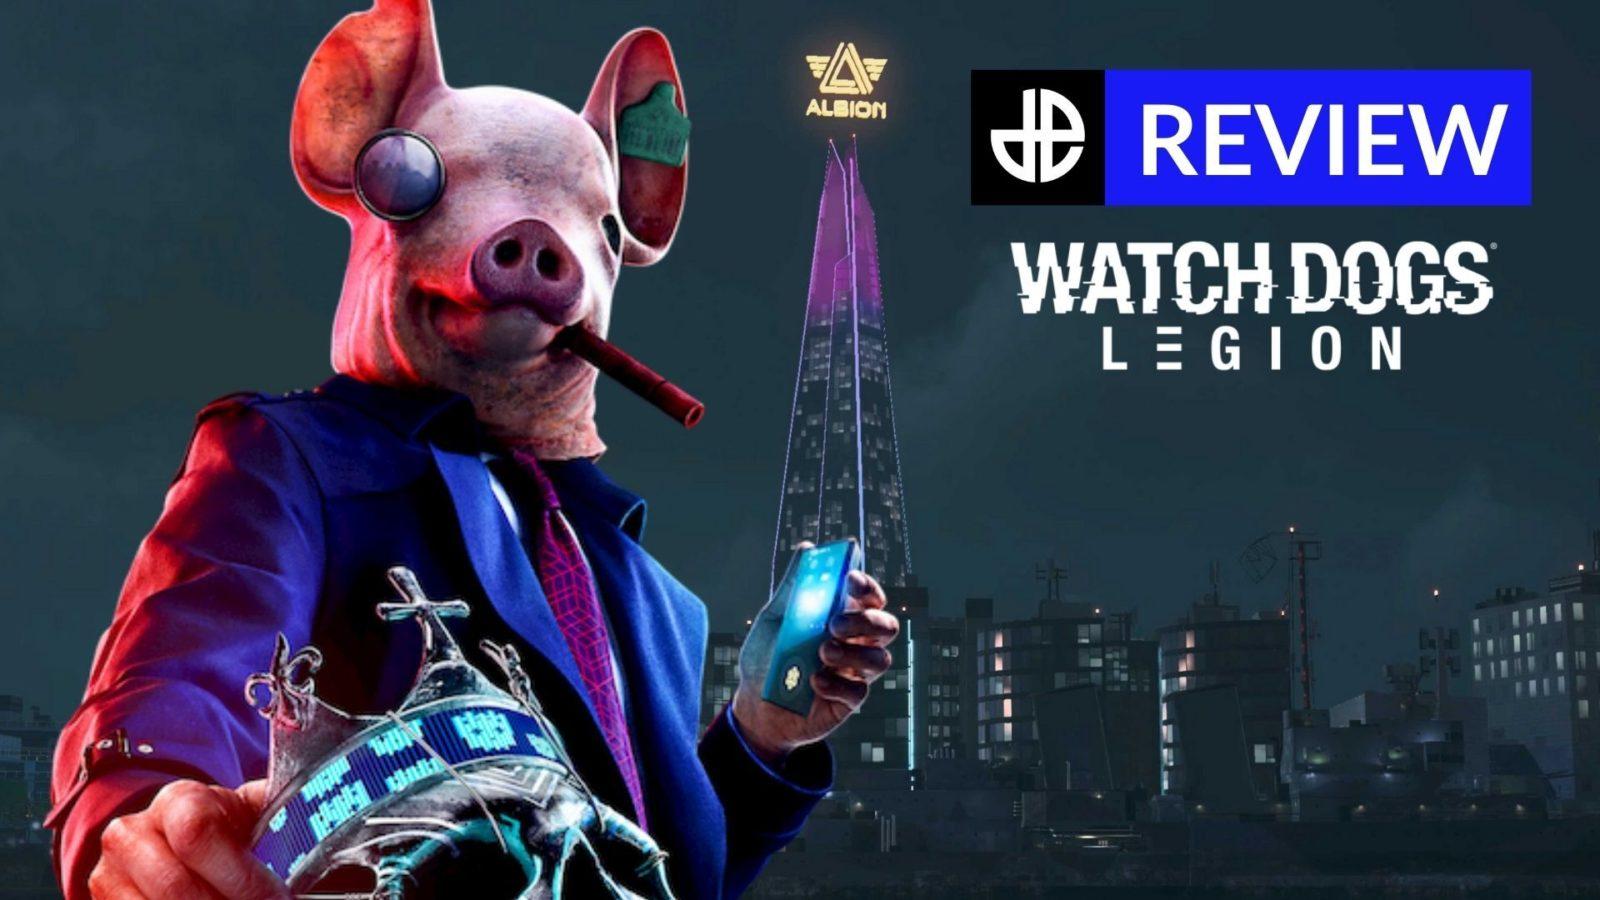 Down to the Wire Watch Dogs: Legion achievement and trophy guide - Polygon